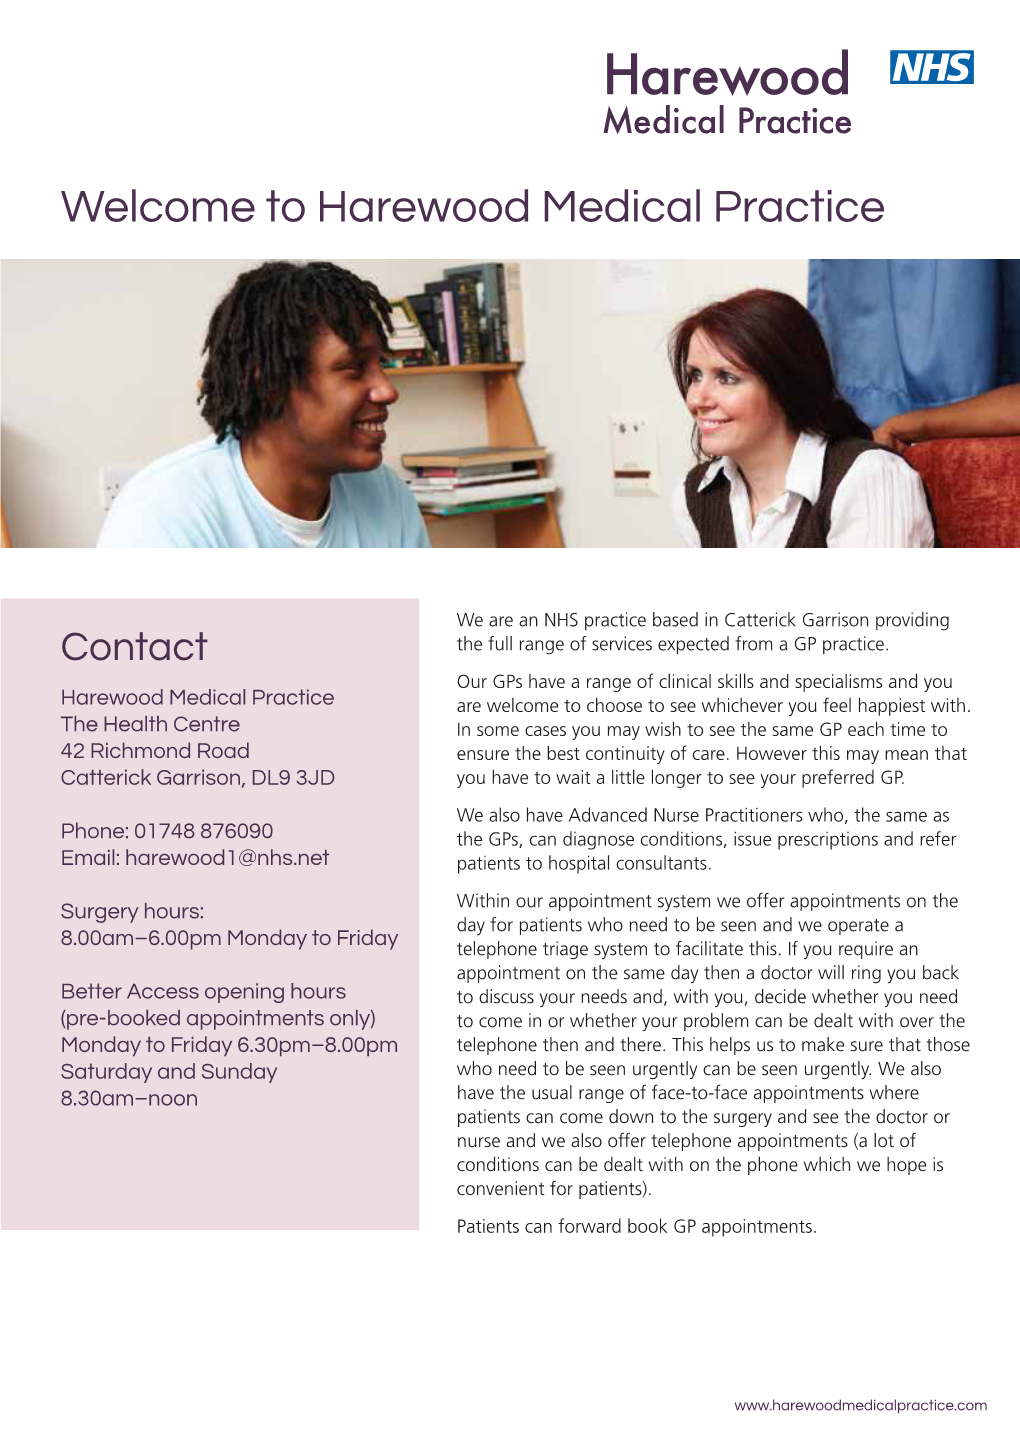 Harewood Medical Practice Welcome to Harewood Medical Practice